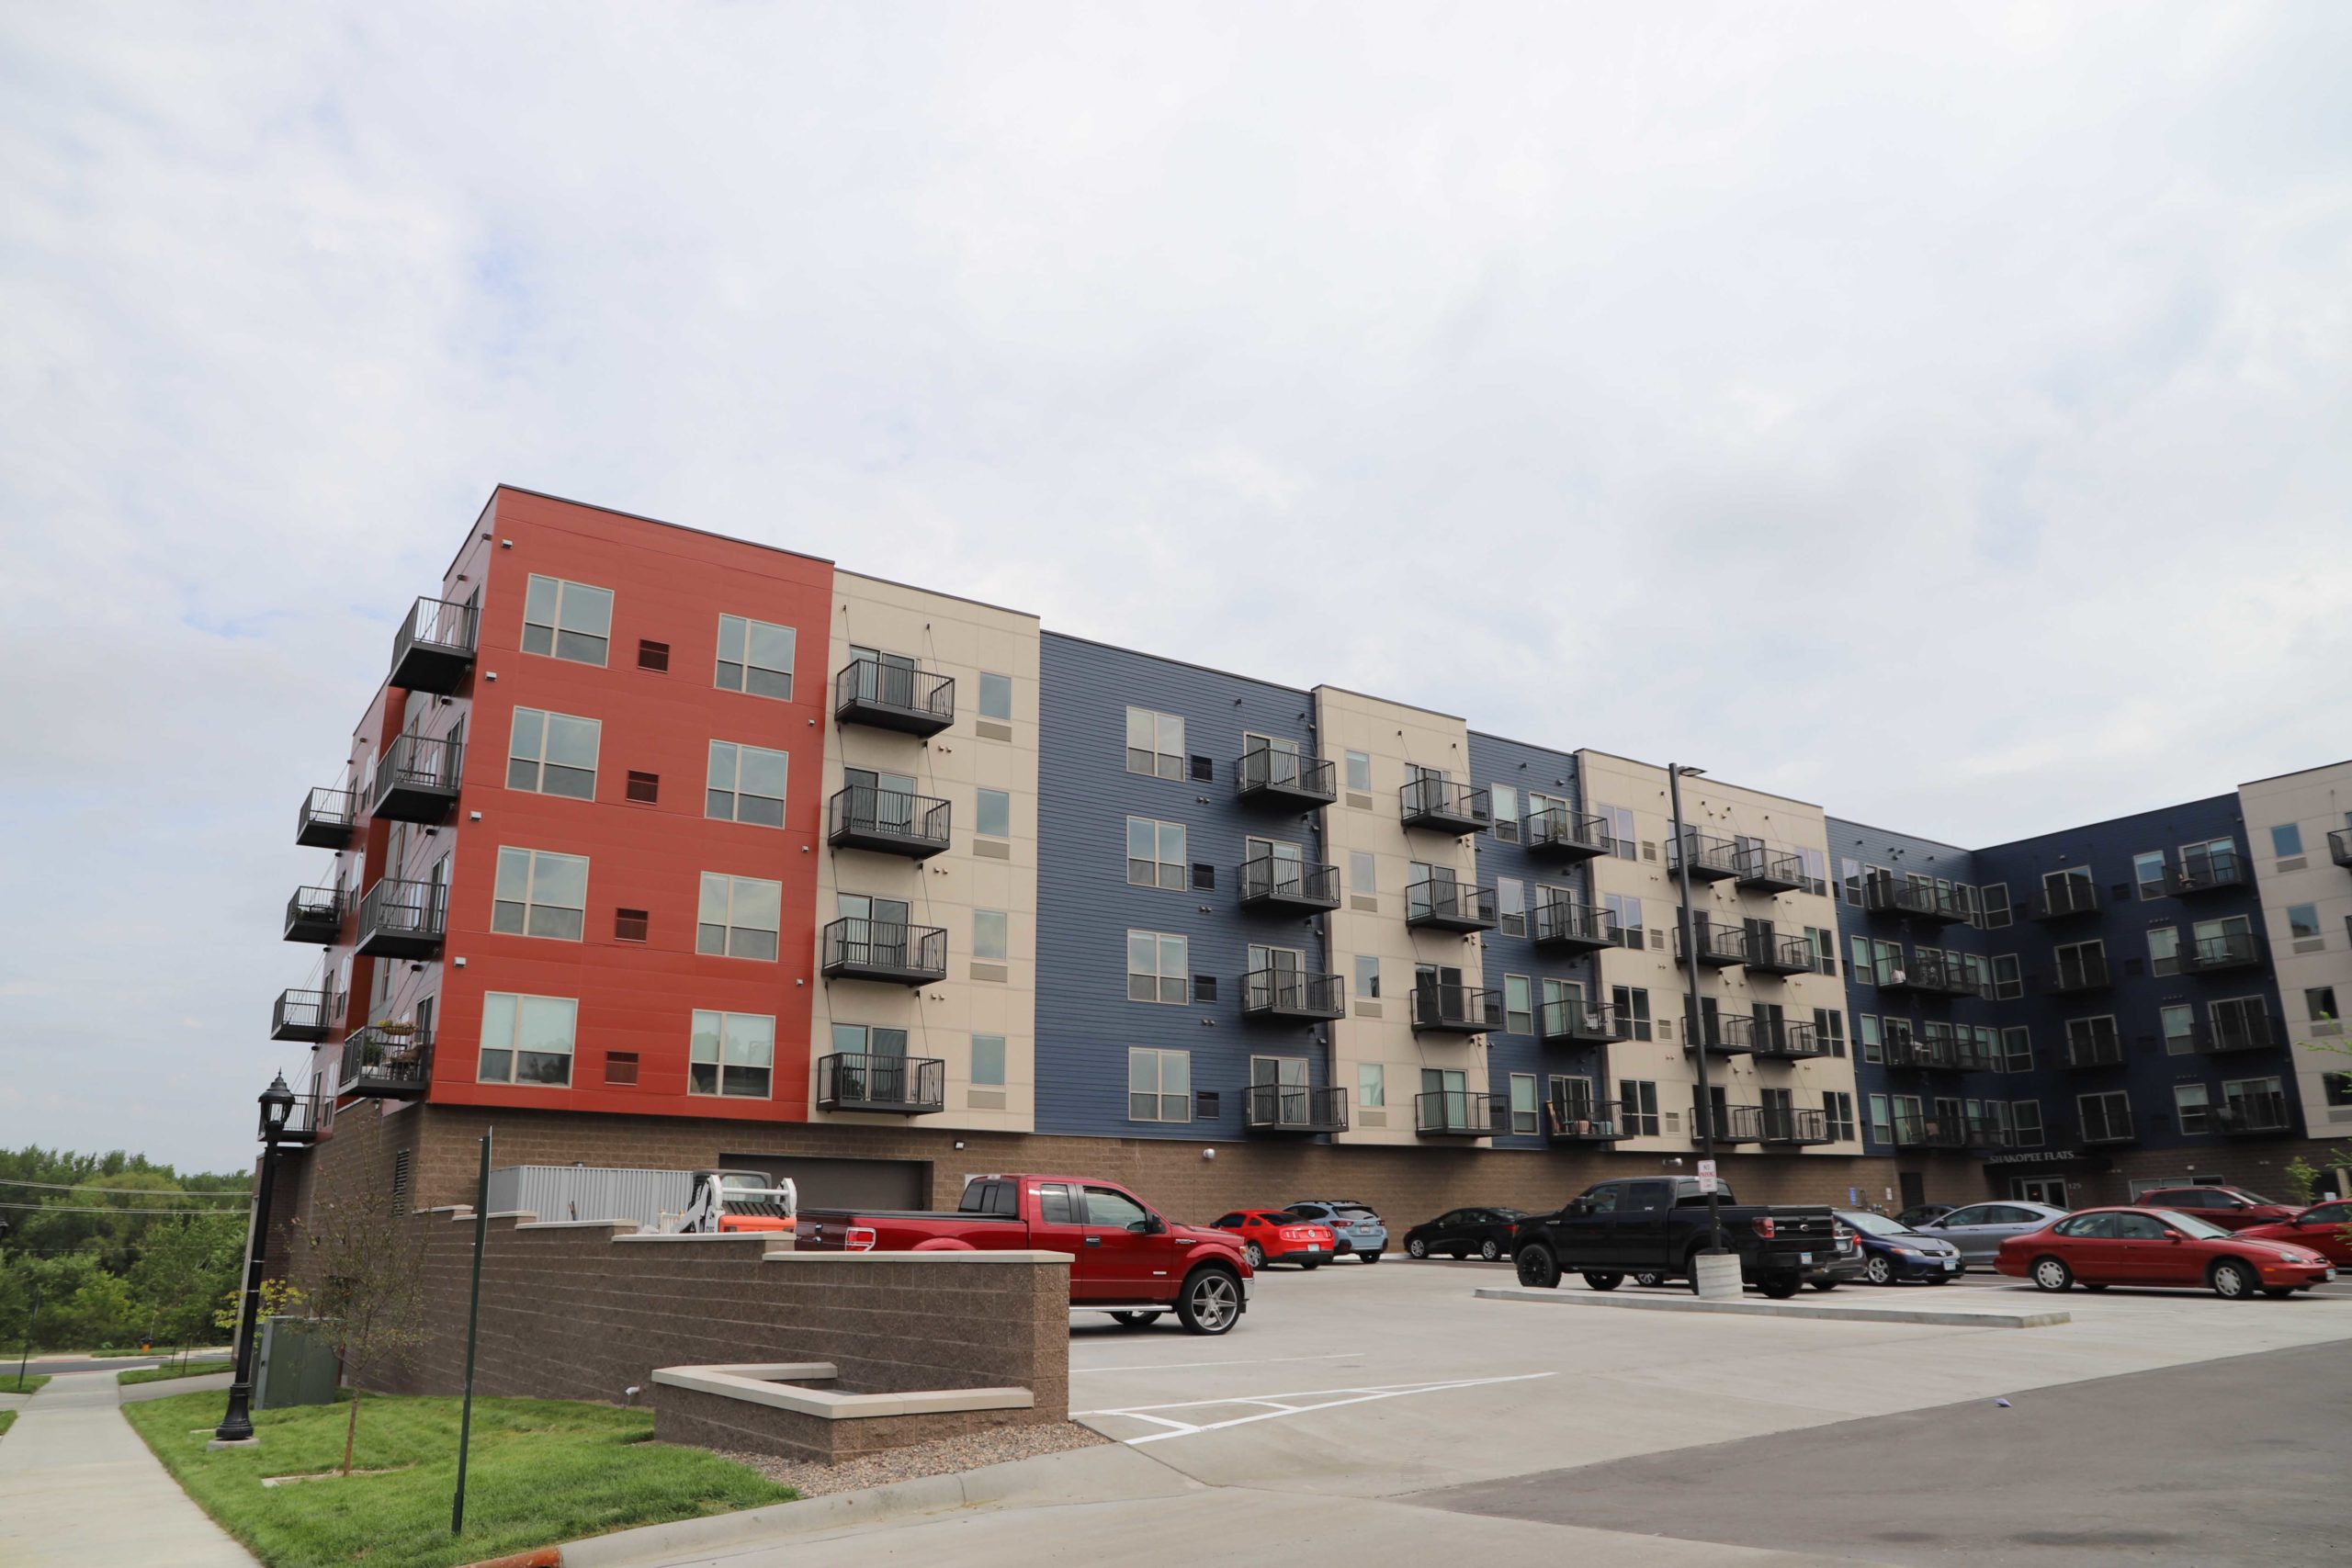 End of a red, cream, and blue, five-story apartment building with a parking lot in Shakopee, MN.